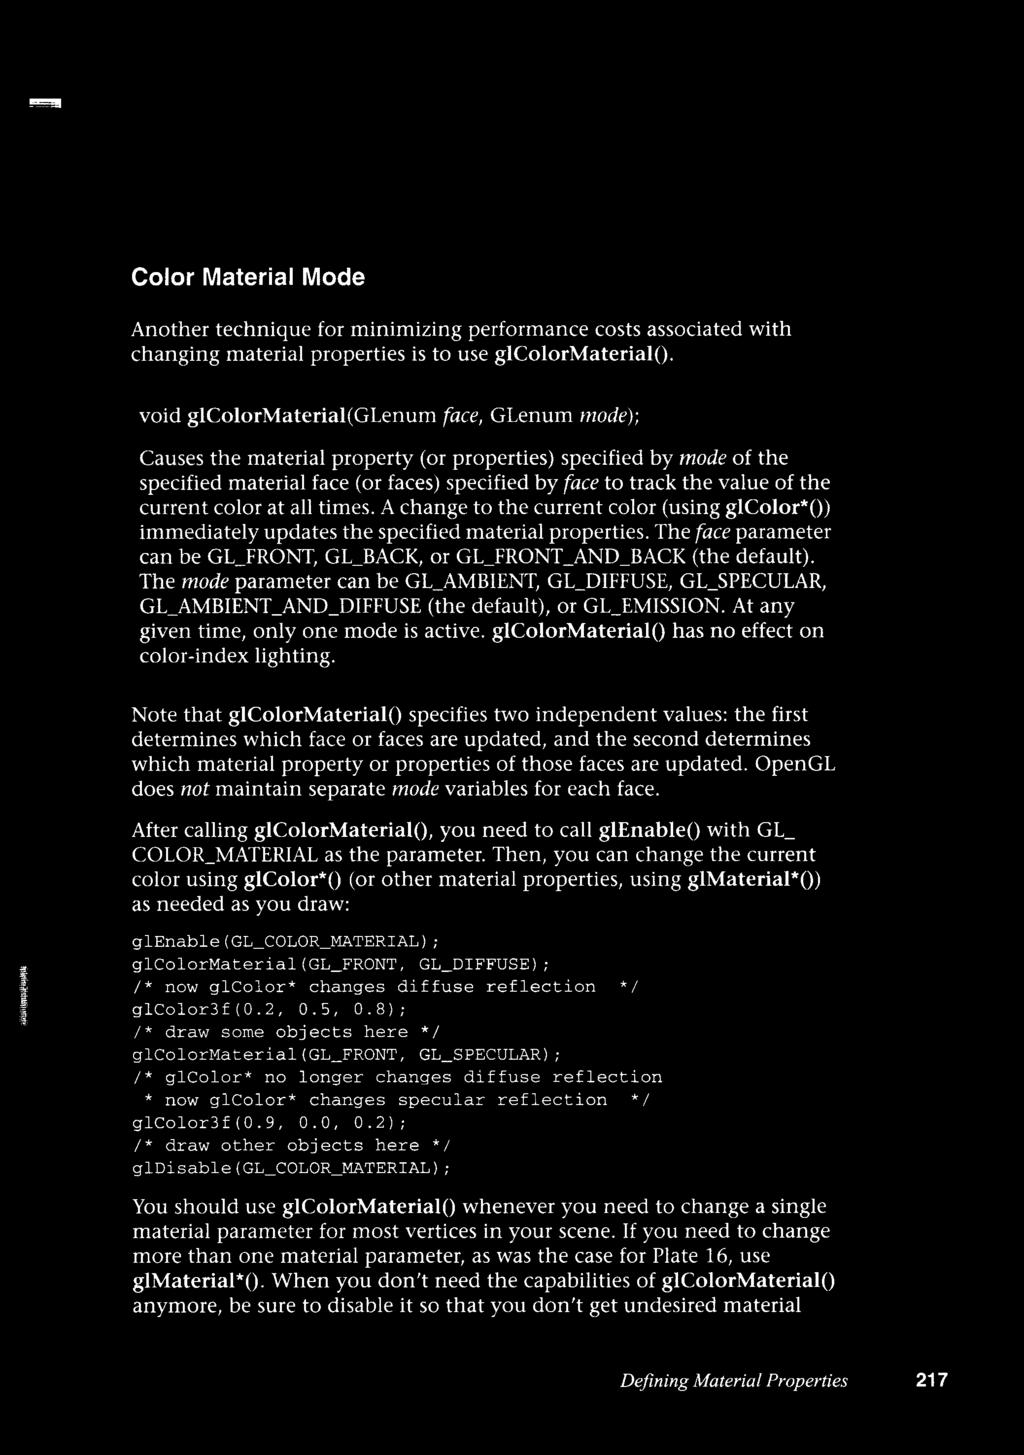 At any given time, only one mode is active. glcolormaterial() has no effect on color-index lighting.